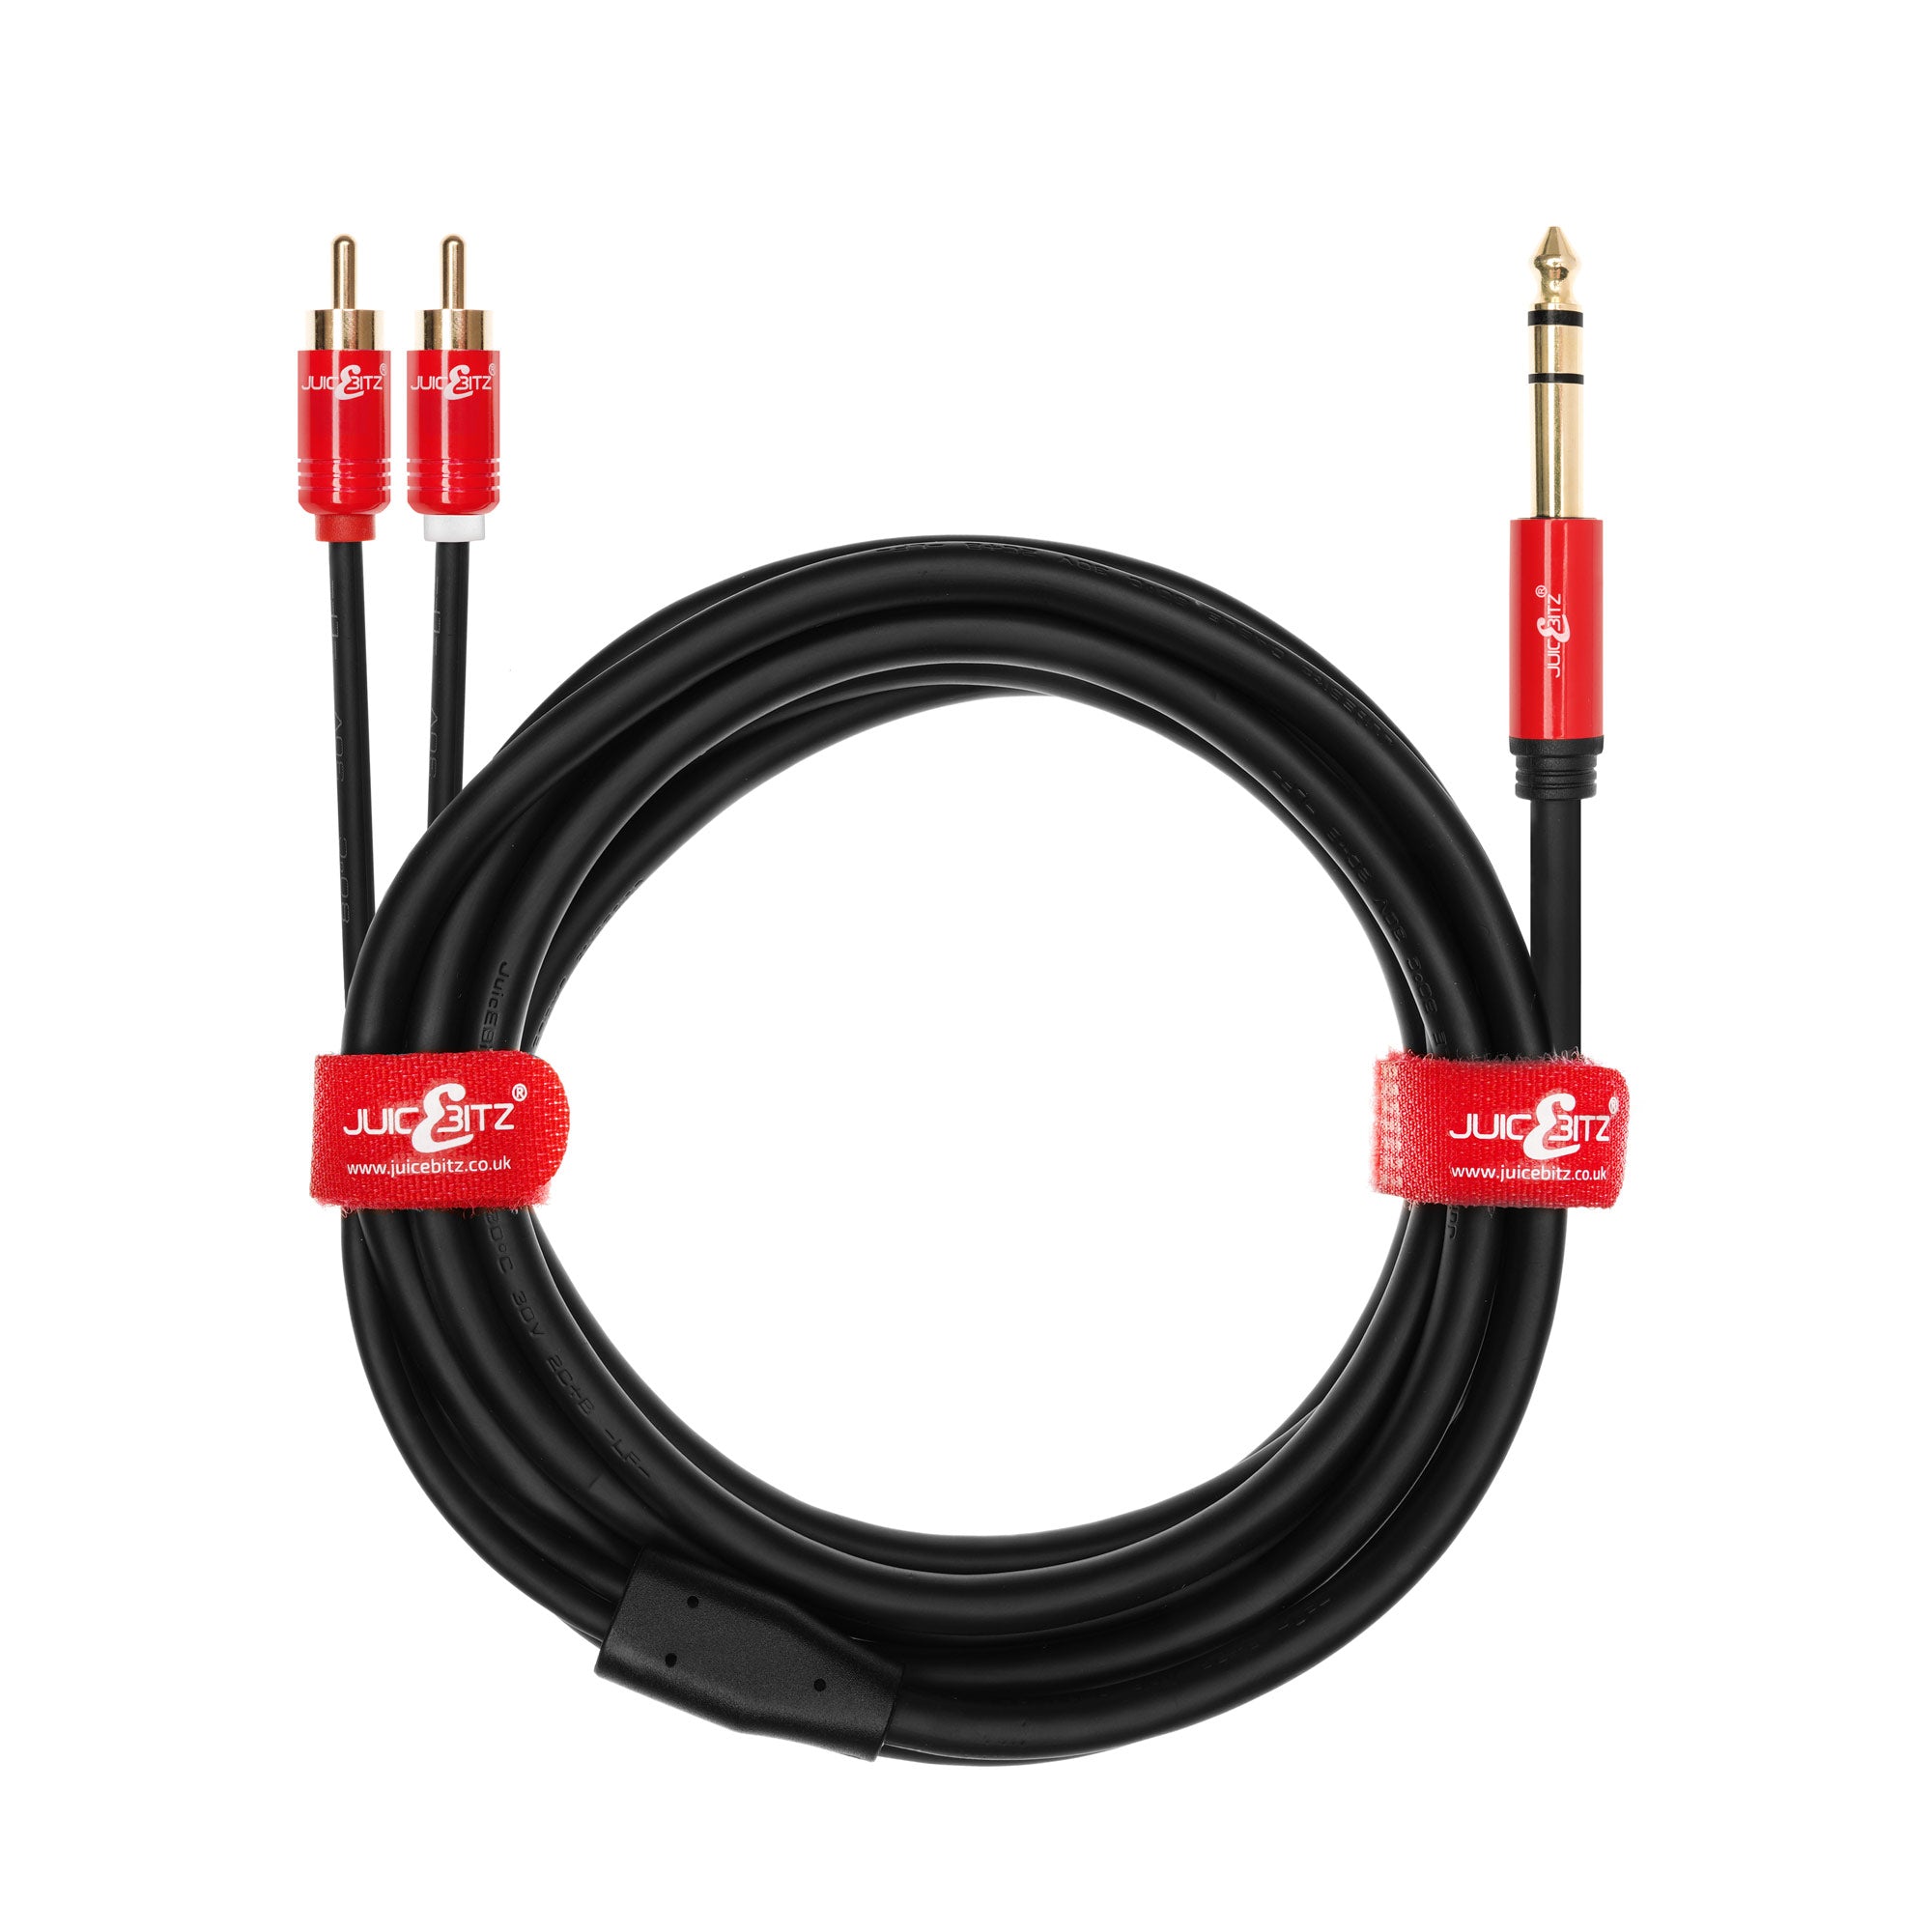 6.35mm (1/4") Jack to 2 x Phono RCA Male Stereo Cable Lead